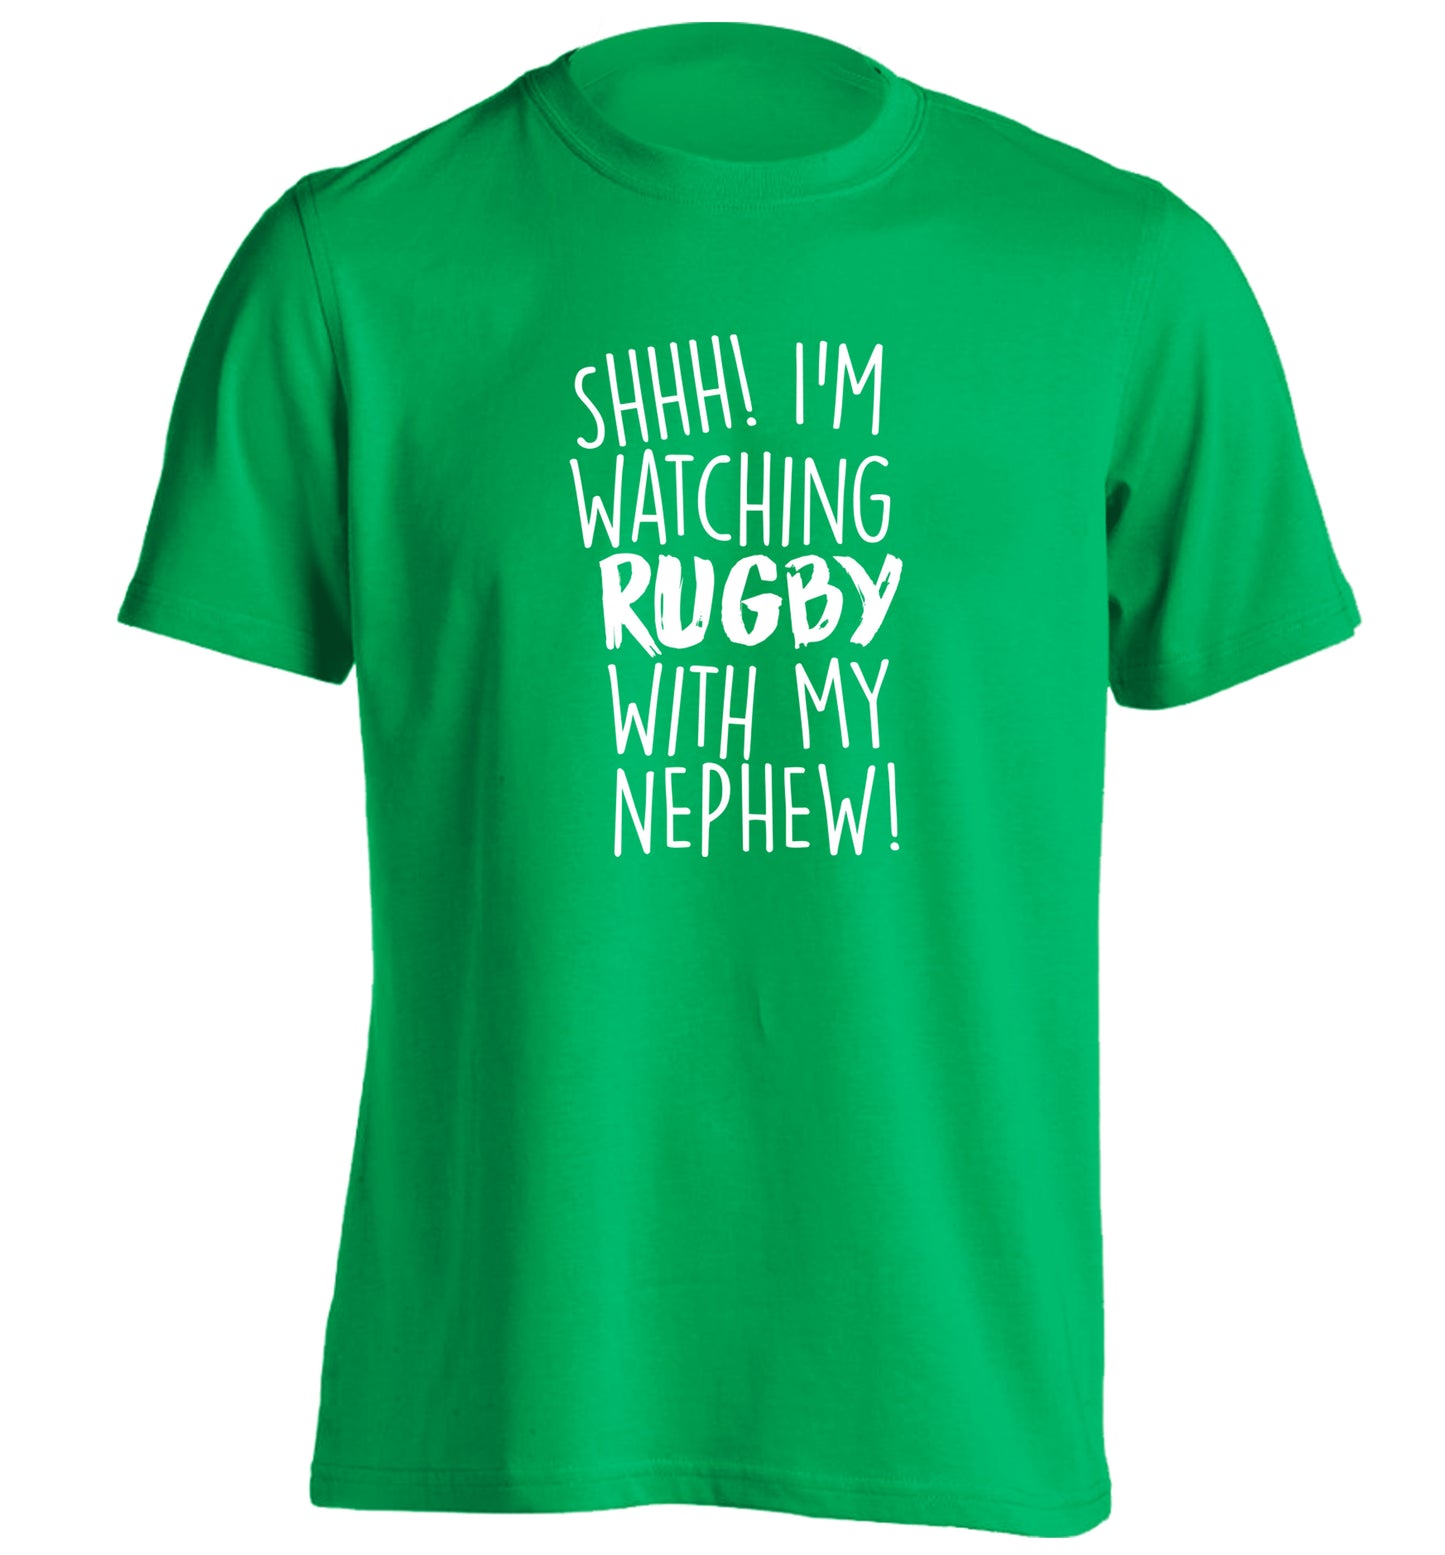 Shh.. I'm watching rugby with my nephew adults unisex green Tshirt 2XL